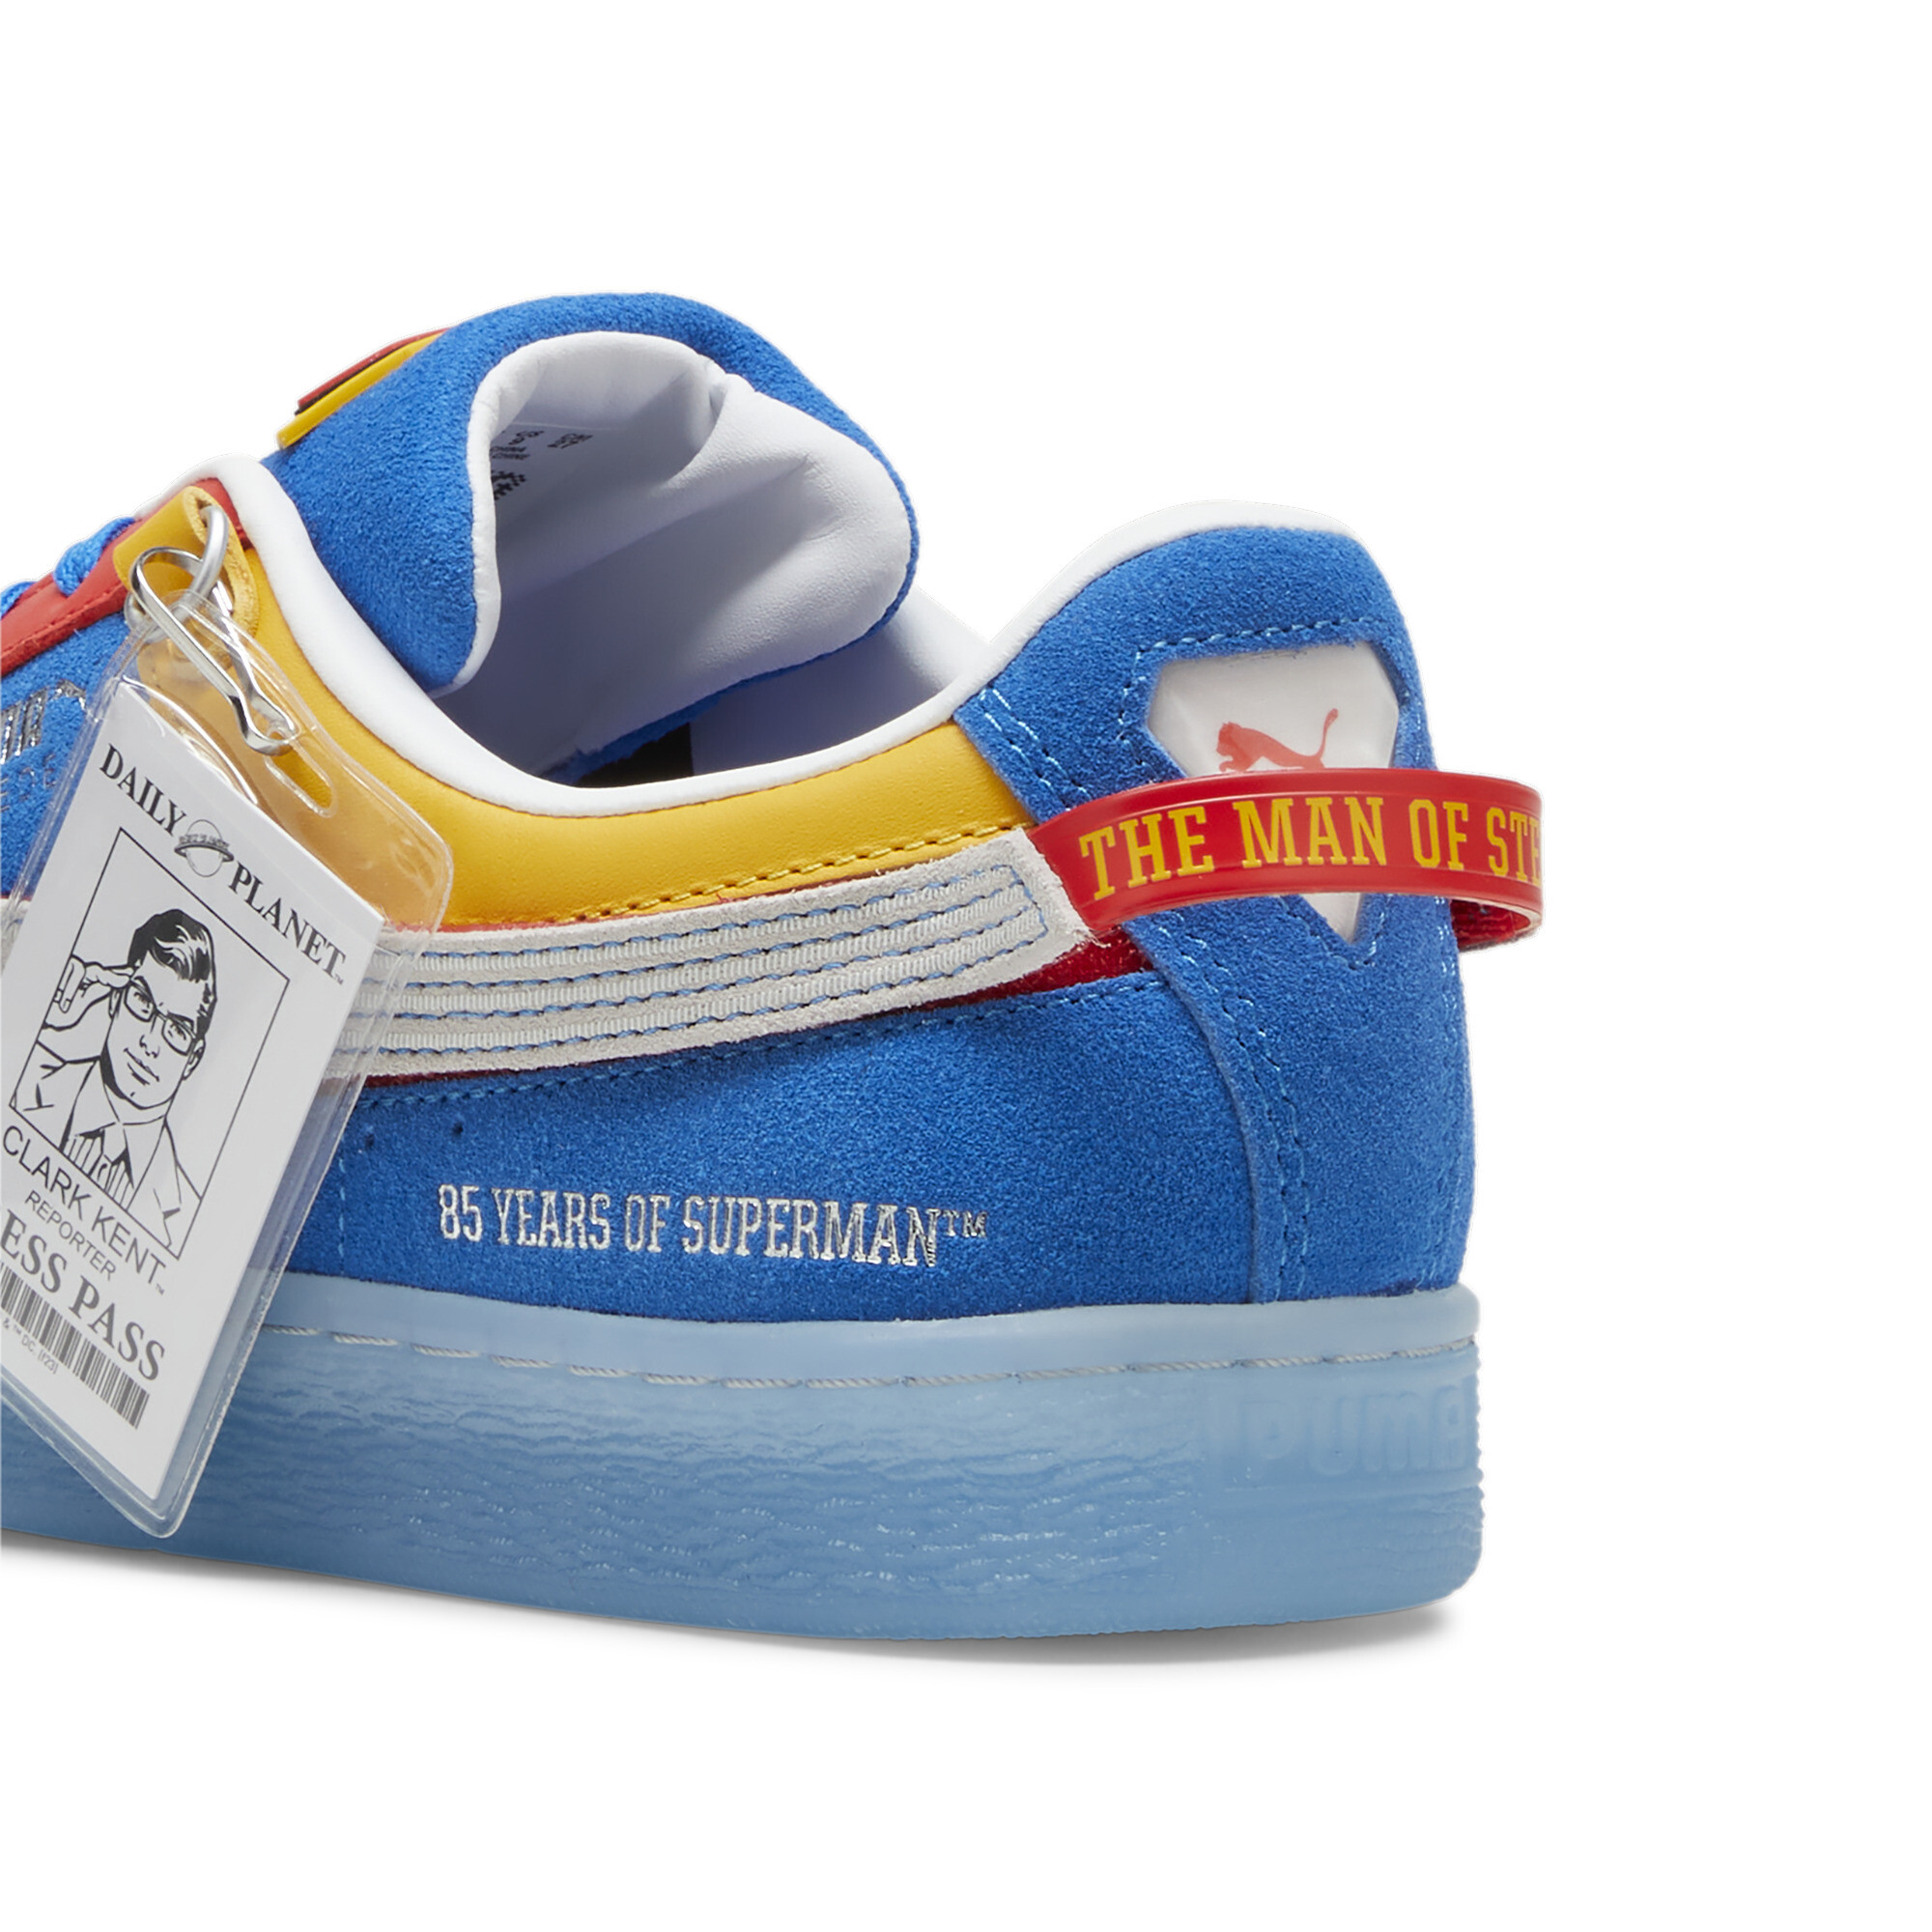 Puma X SUPERMAN 85th Anniversary Suede Sneakers, Blue, Size 38.5, Shoes